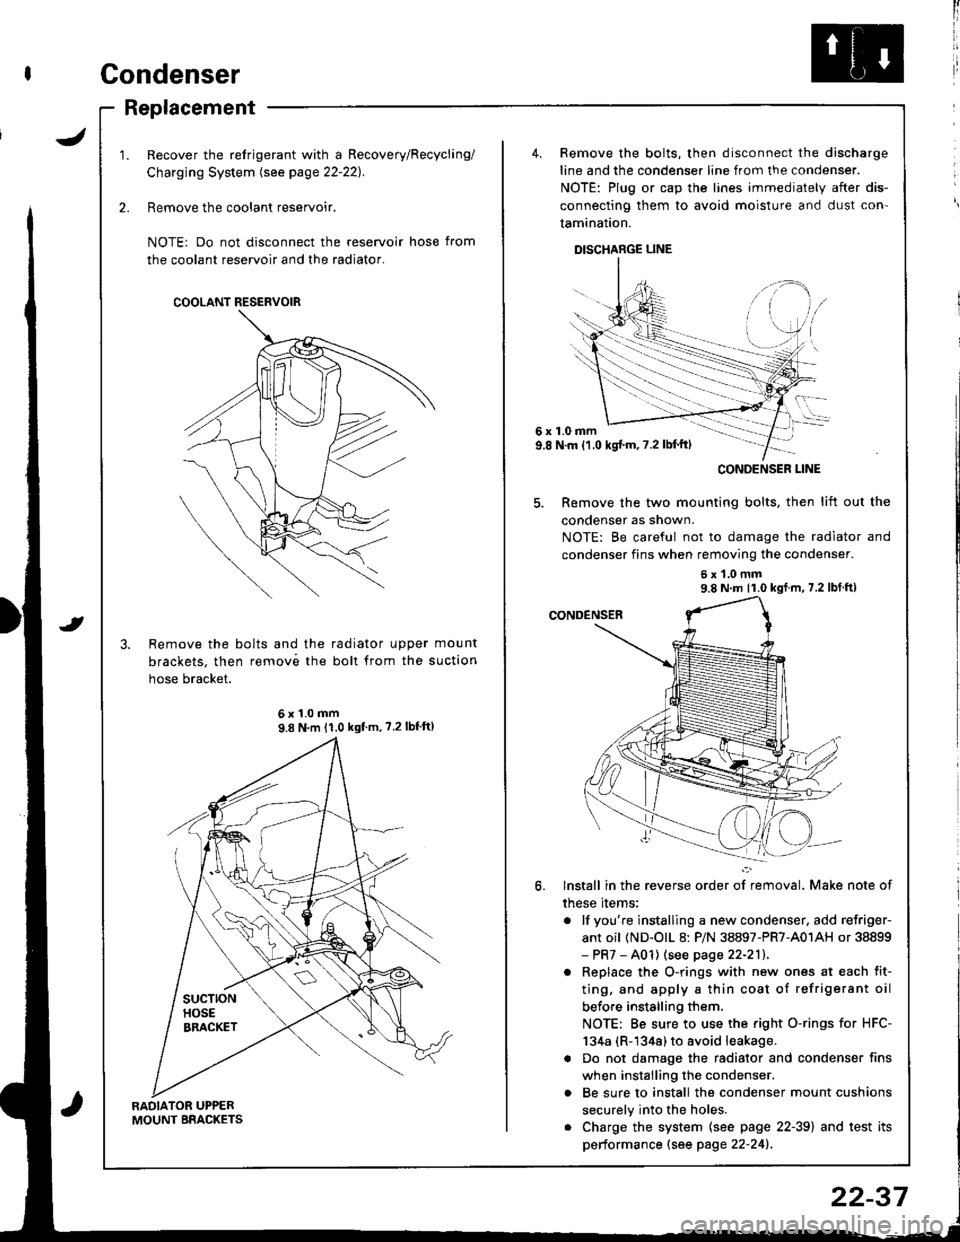 HONDA INTEGRA 1998 4.G User Guide Condenser
J
Replacement
RADIATOR UPPERMOUNT BRACKETS
Recover the refrigerant with a Recovery/Recycling/
Charging System lsee page 22-221.
Remove the coolant reservoir.
NOTE: Do not disconnect the rese